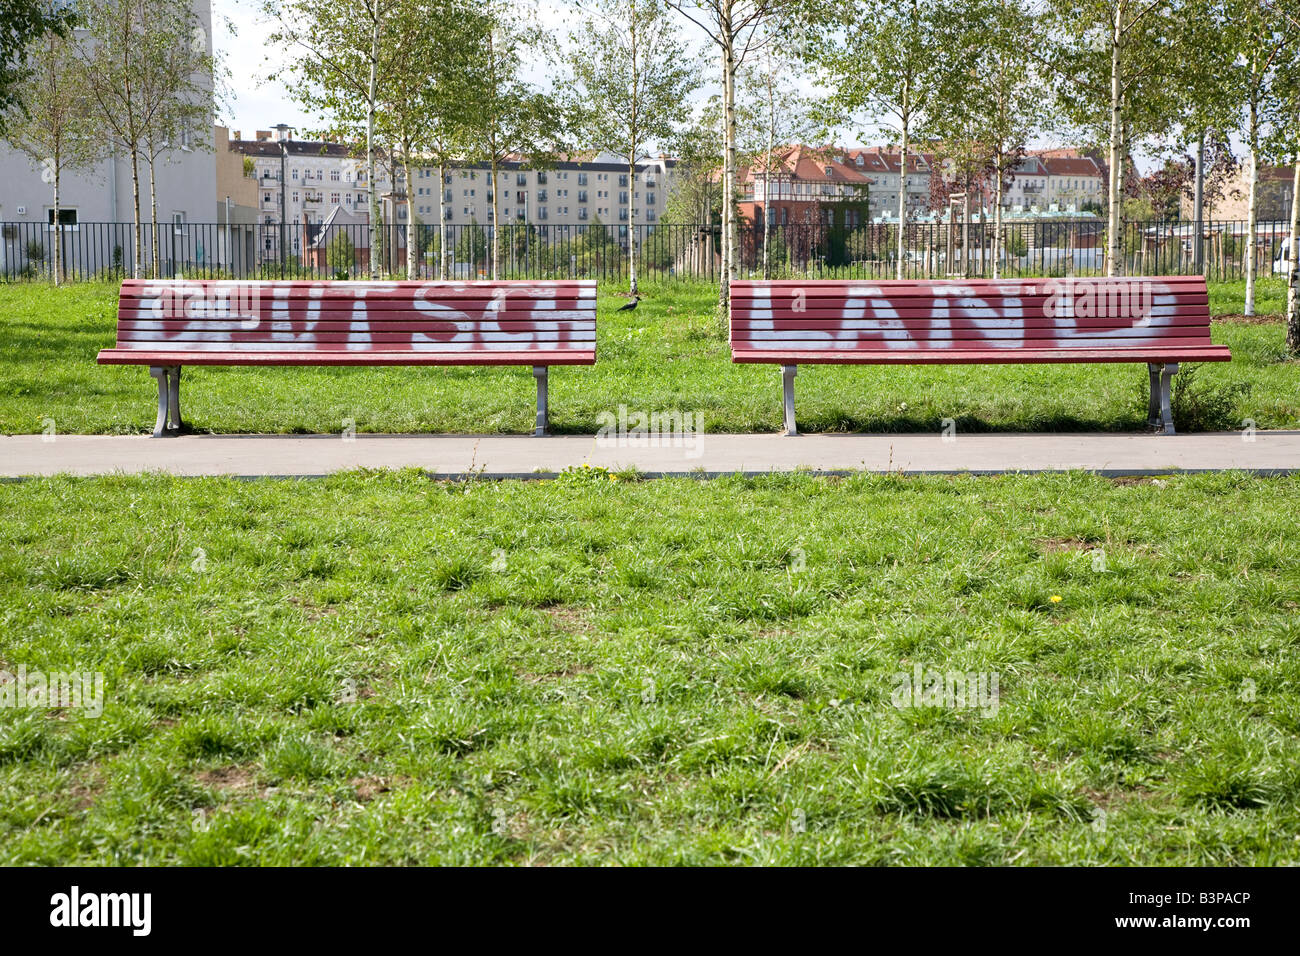 2 wooden bench s in Berlin with the word Deutschland Germany written across them Stock Photo